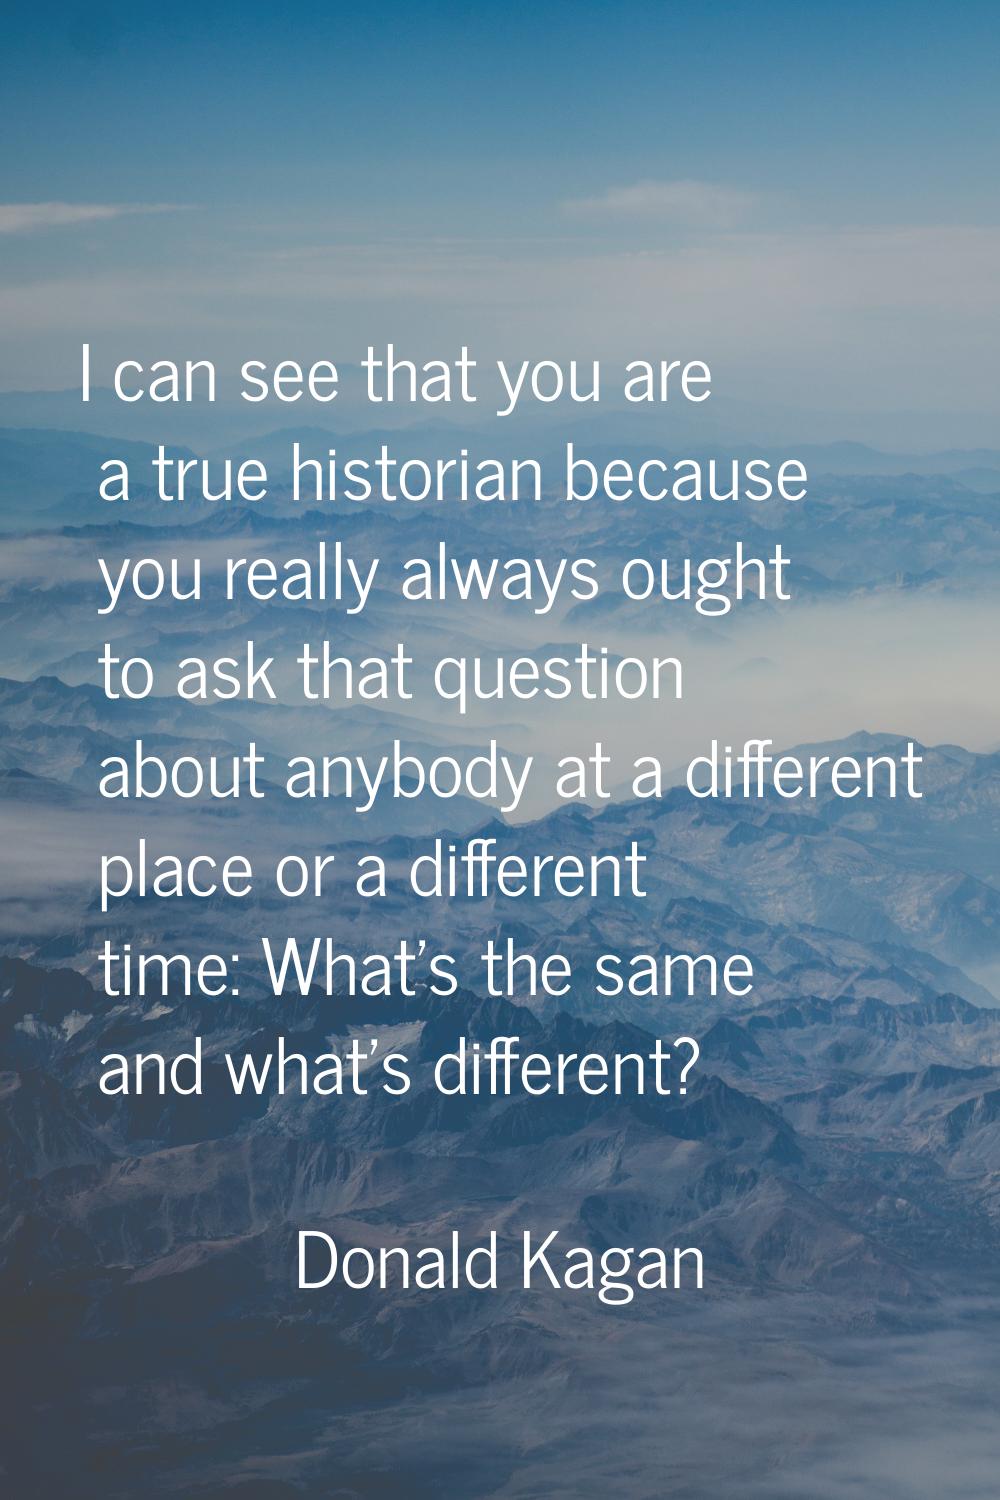 I can see that you are a true historian because you really always ought to ask that question about 